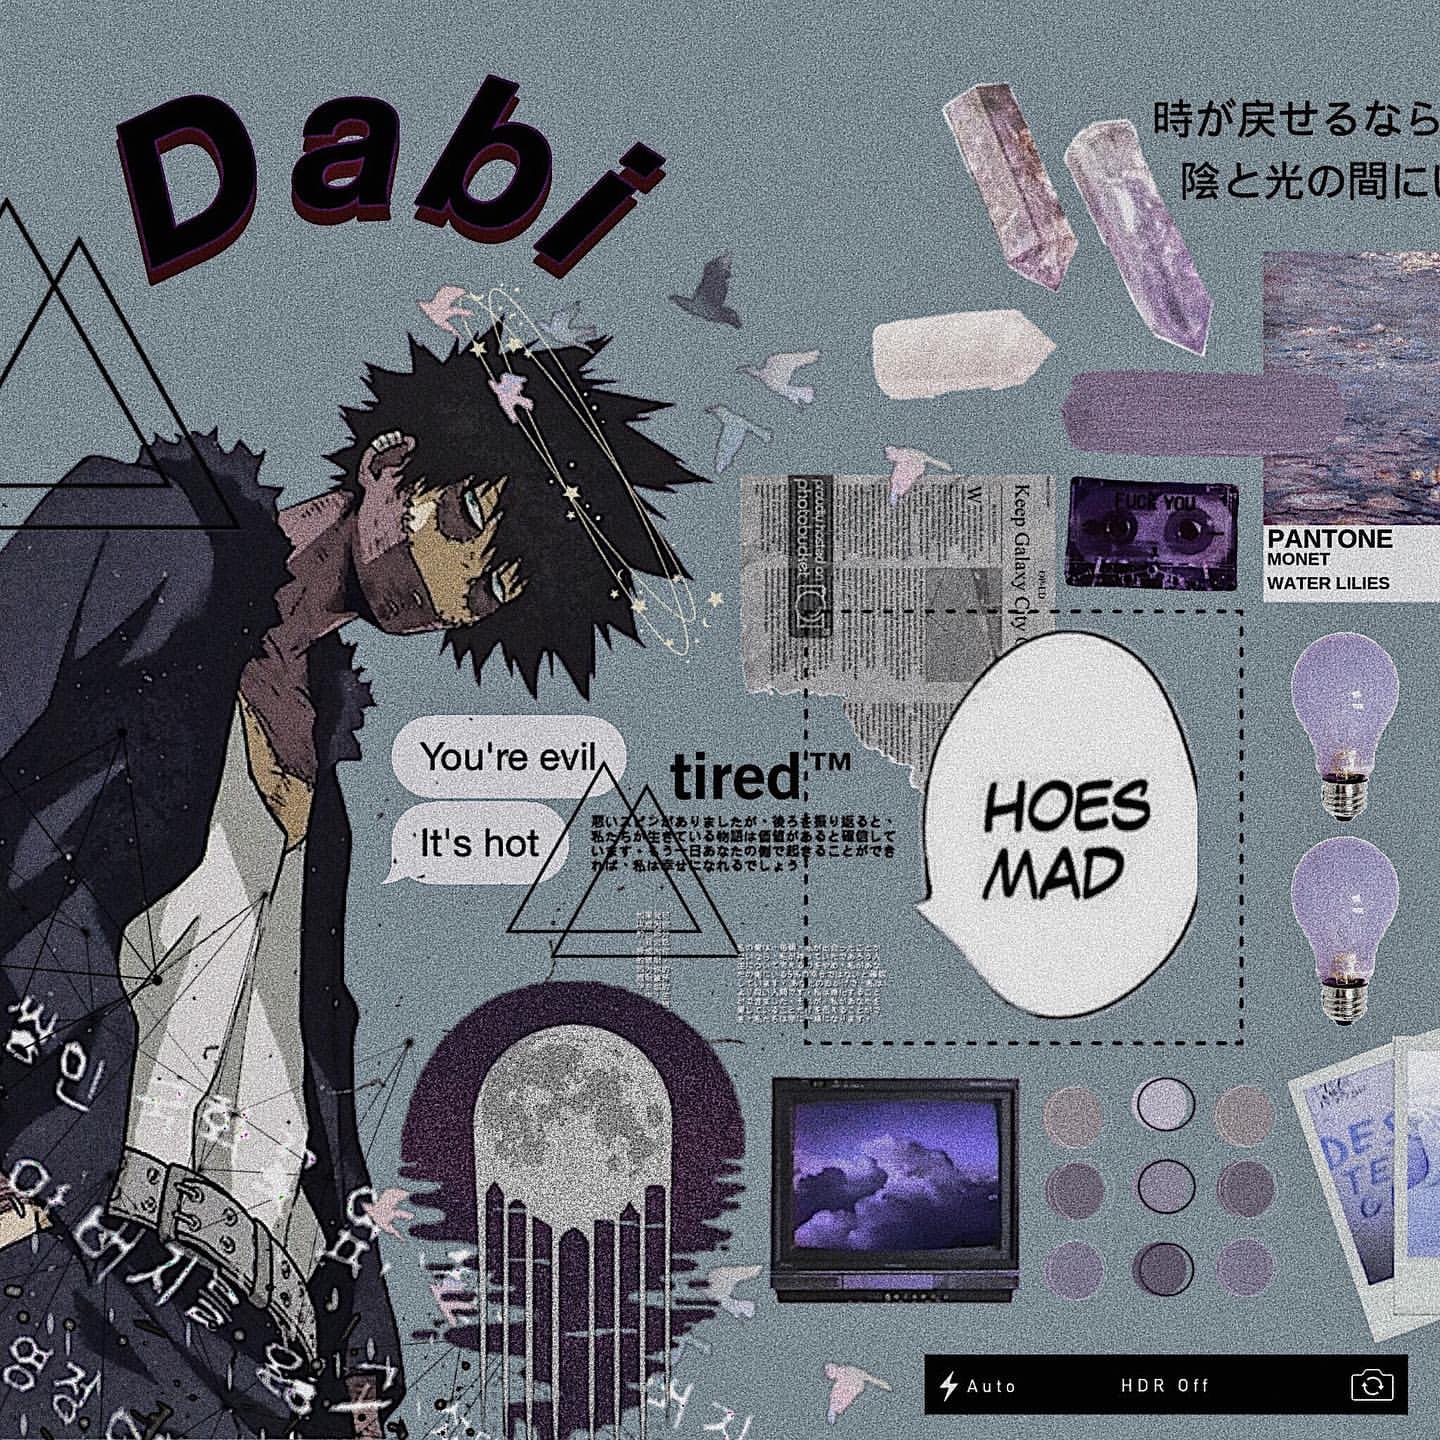 Posts tagged as #dabiaesthetic